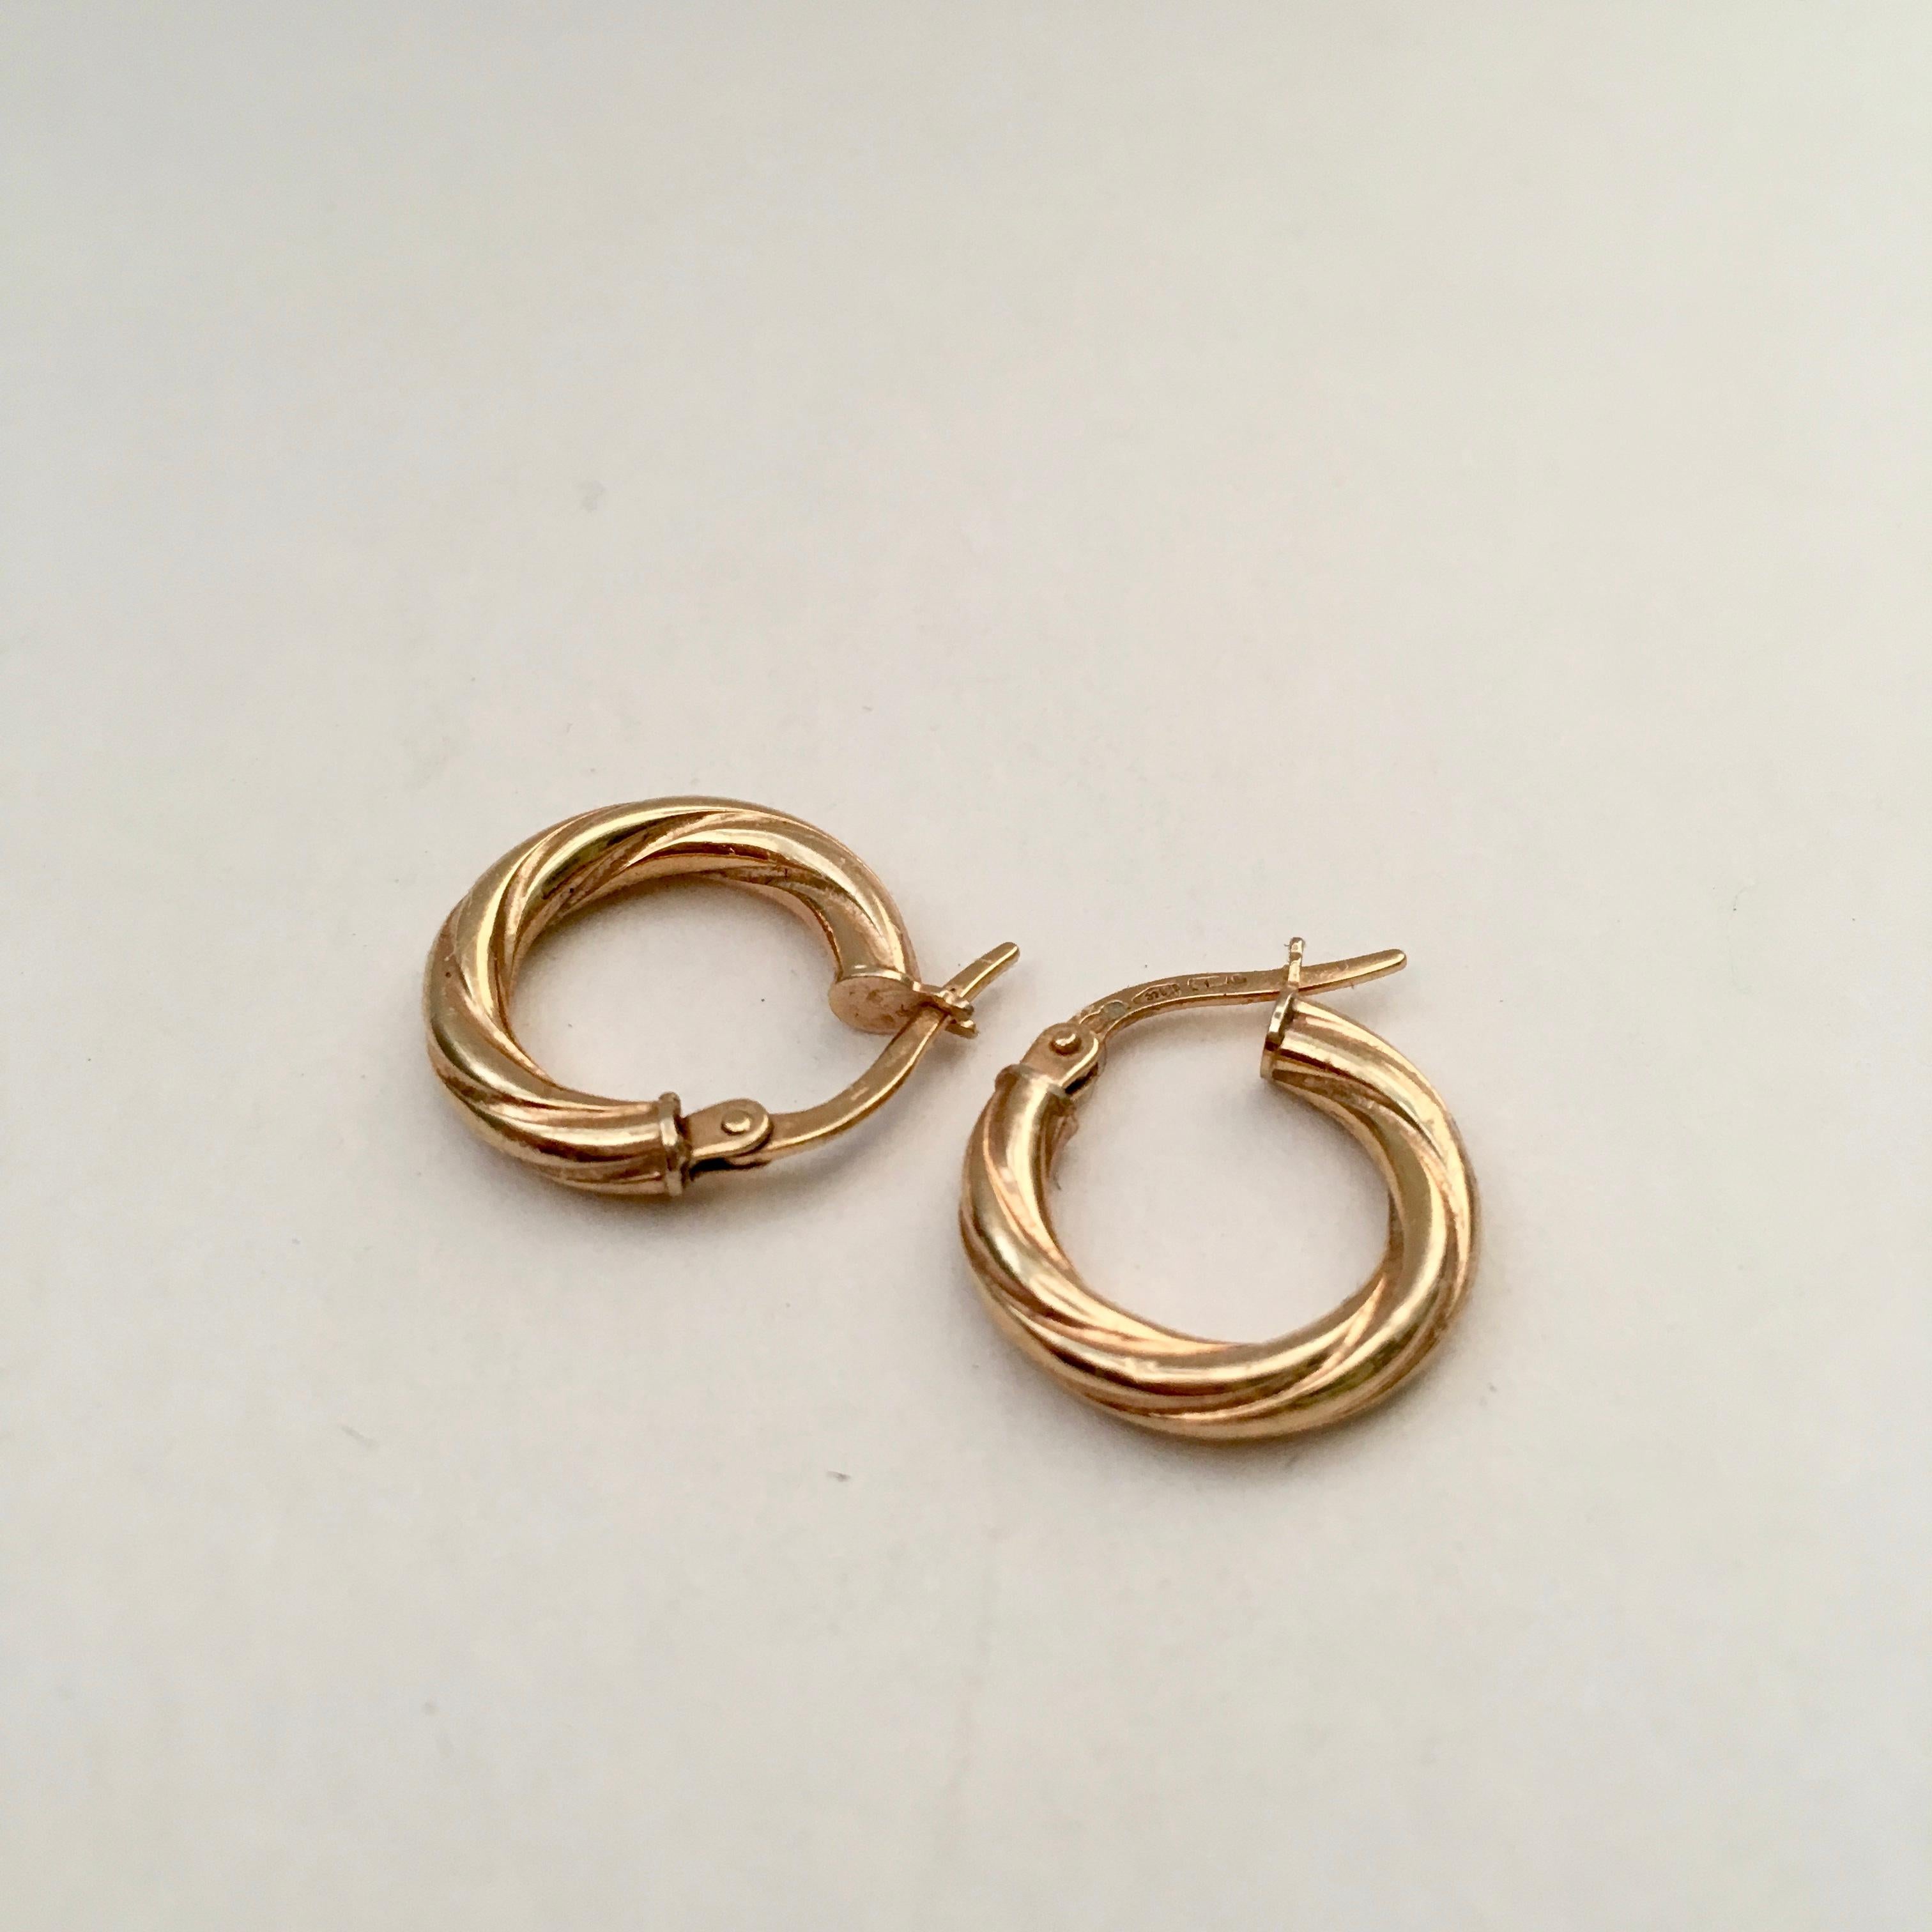 A stylish pair of genuine vintage gold hoops in a twisted design. They are on the smaller size at 1.5cm by 1.6cm with a depth of 0.3cm. They are hollow so lovely and lightweight to wear. Each post is stamped with 375 for 9 carat gold and the posts